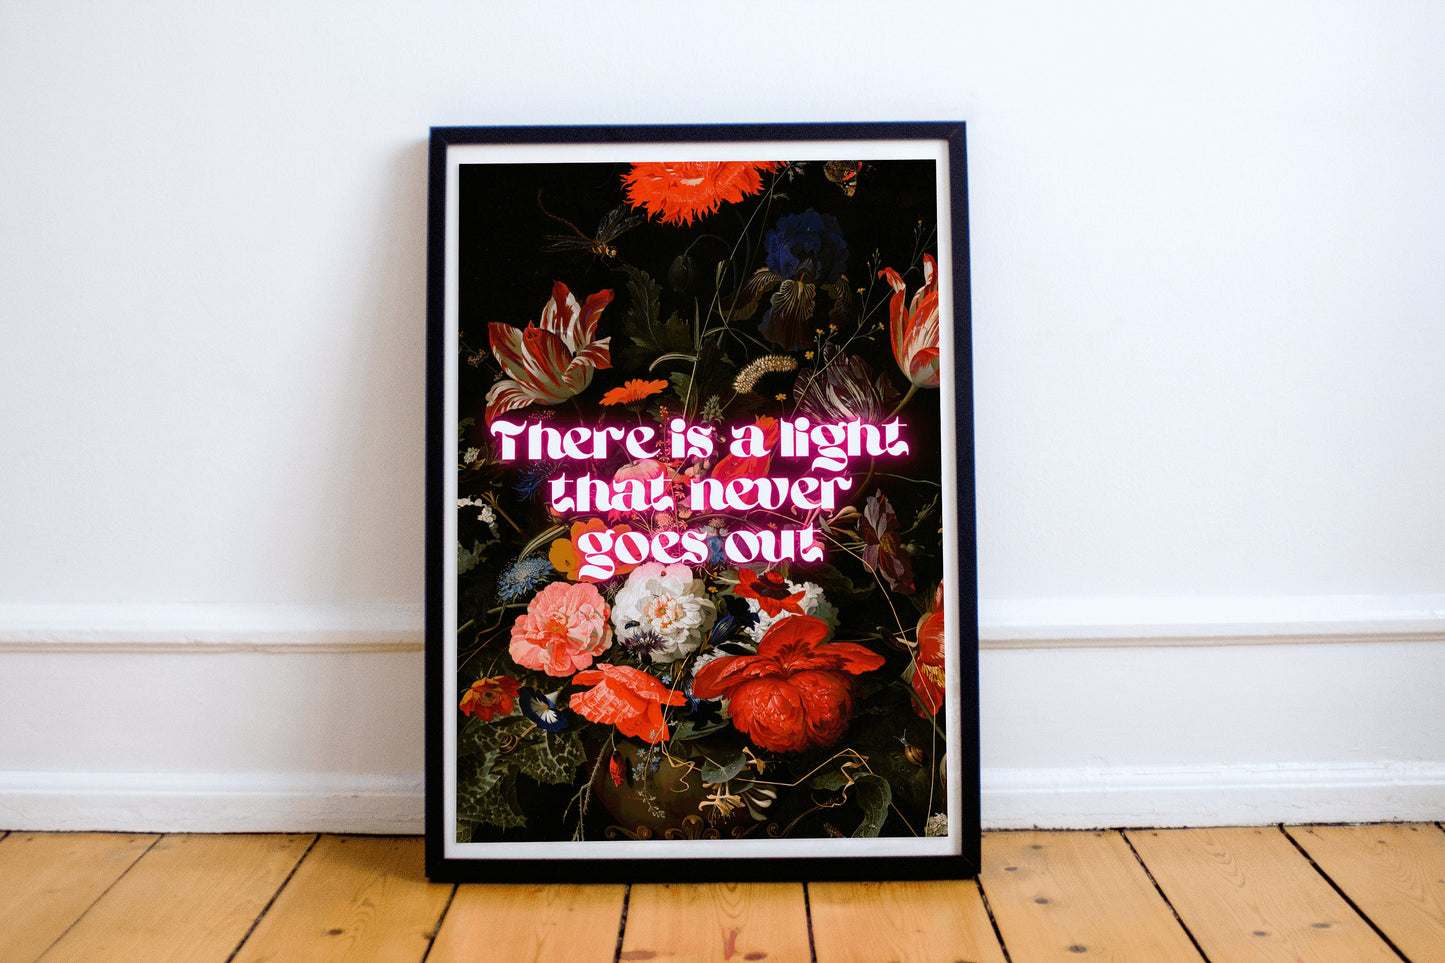 The Smiths Lyrics Music Art Print, Wall Decor, A4, A3, There Is a Light That Never Goes Out Lyrics, The Smiths , Neon Style, Floral Style